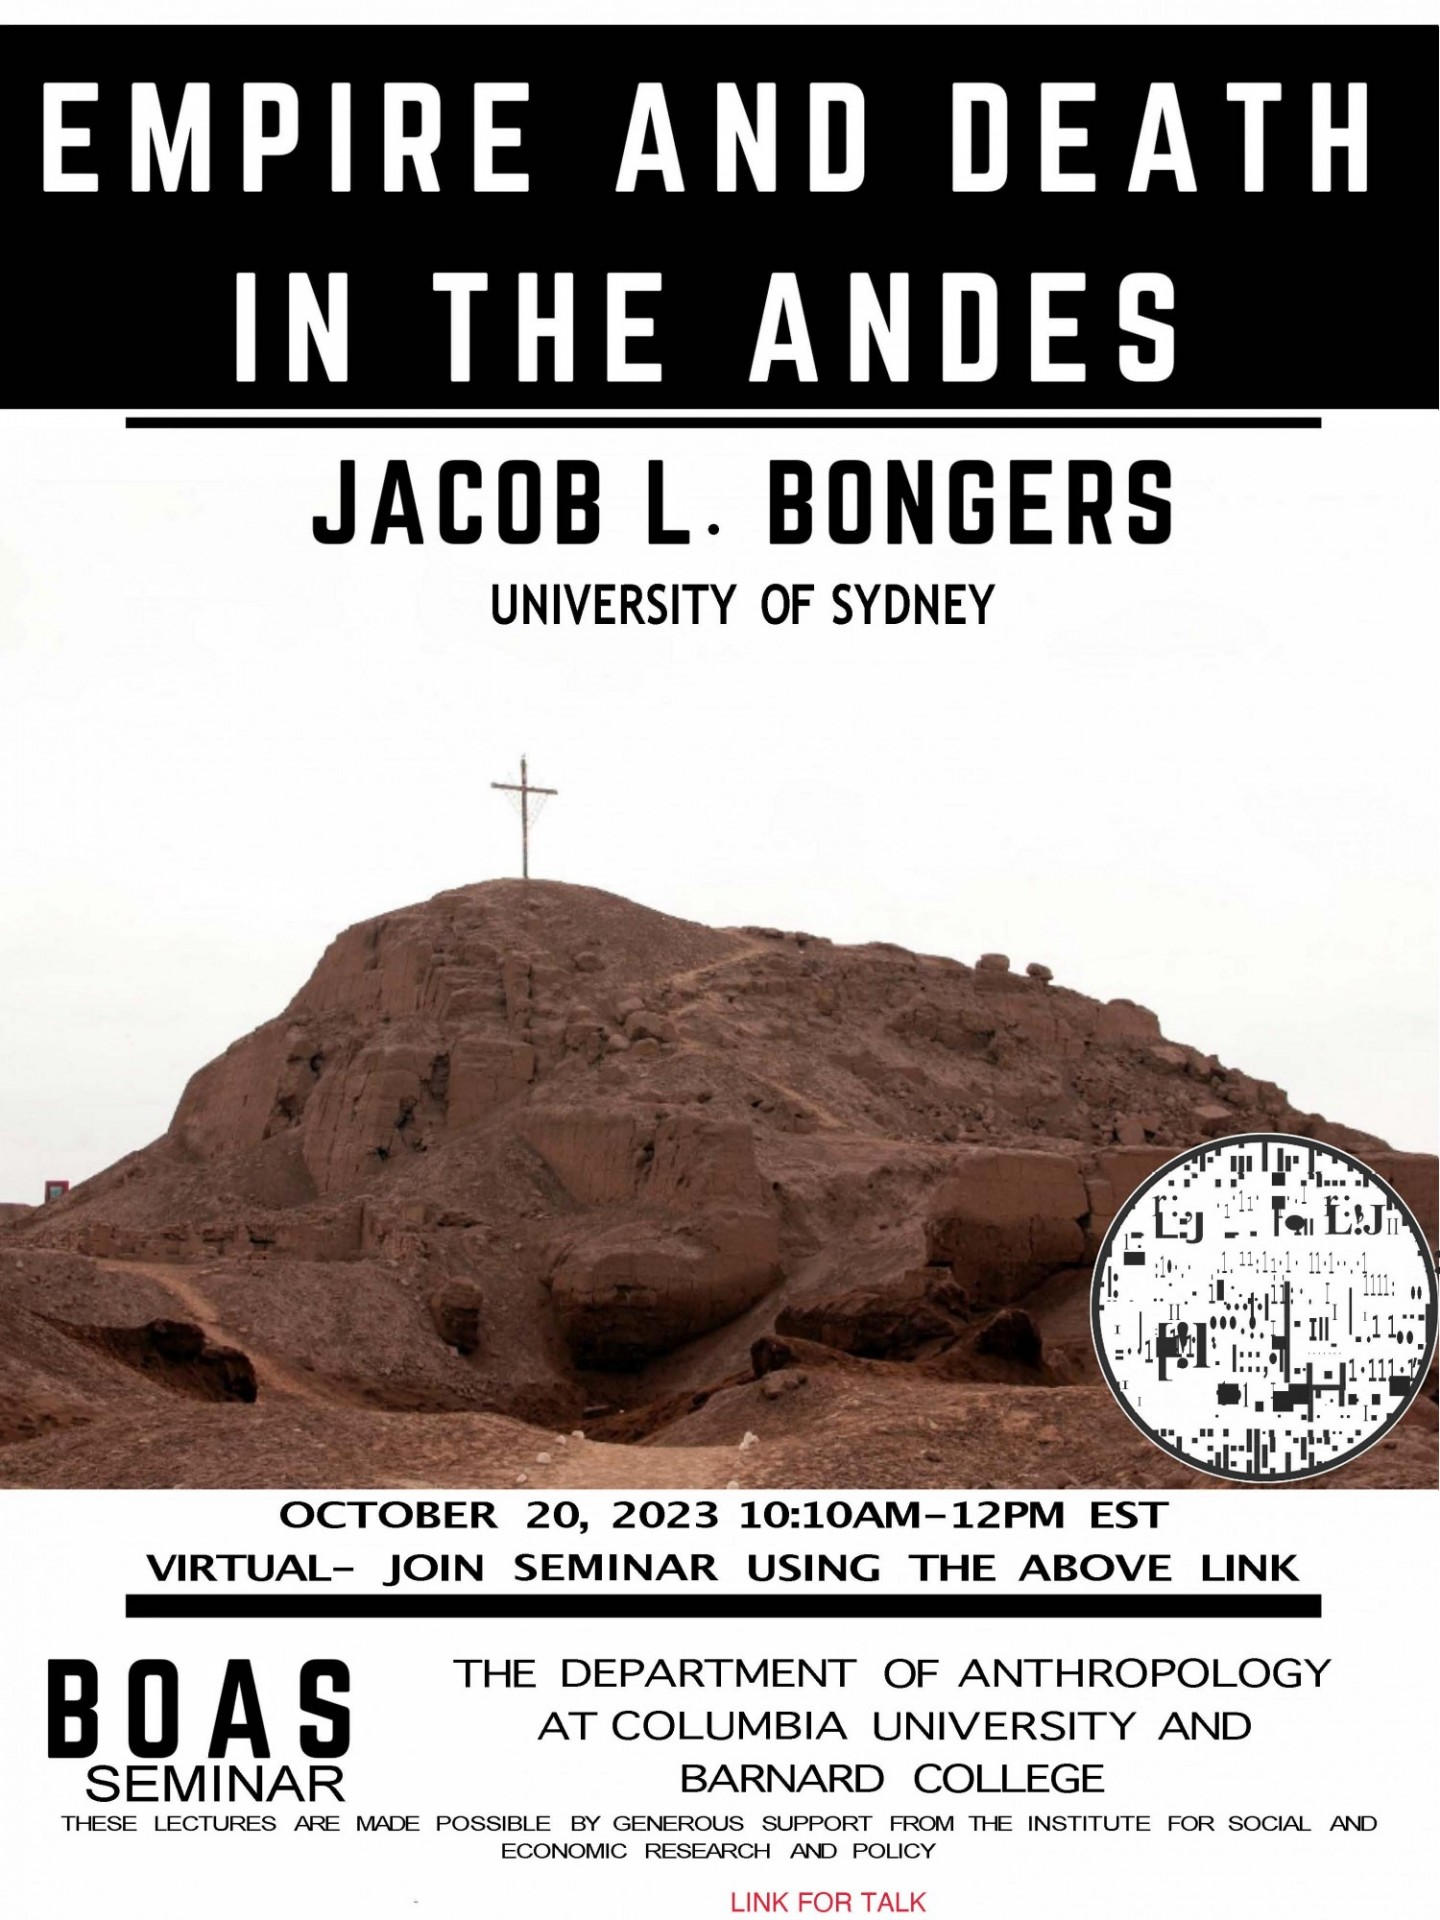 poster, Boas seminar: Jacob L. Bongers, 'Empire and Death in the Andes'